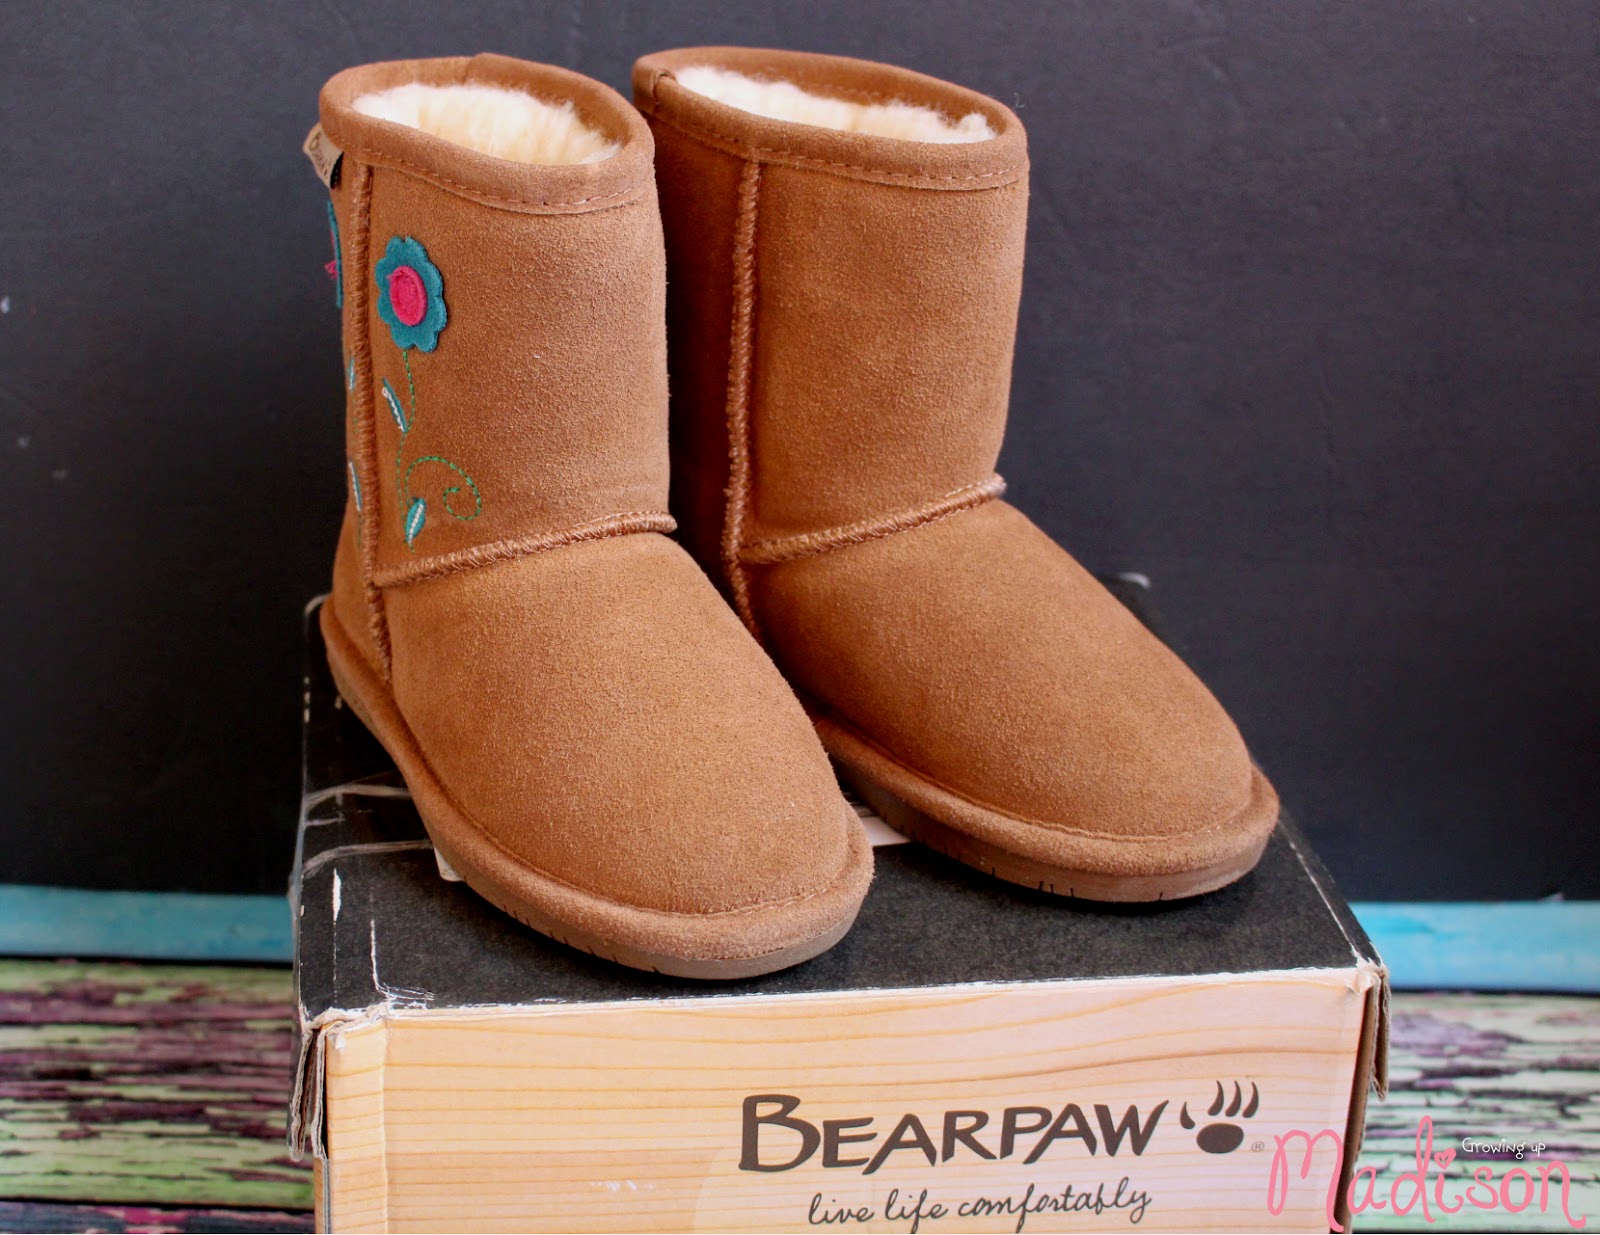 BEARPAW Shoes – Comfortable and Always in Style